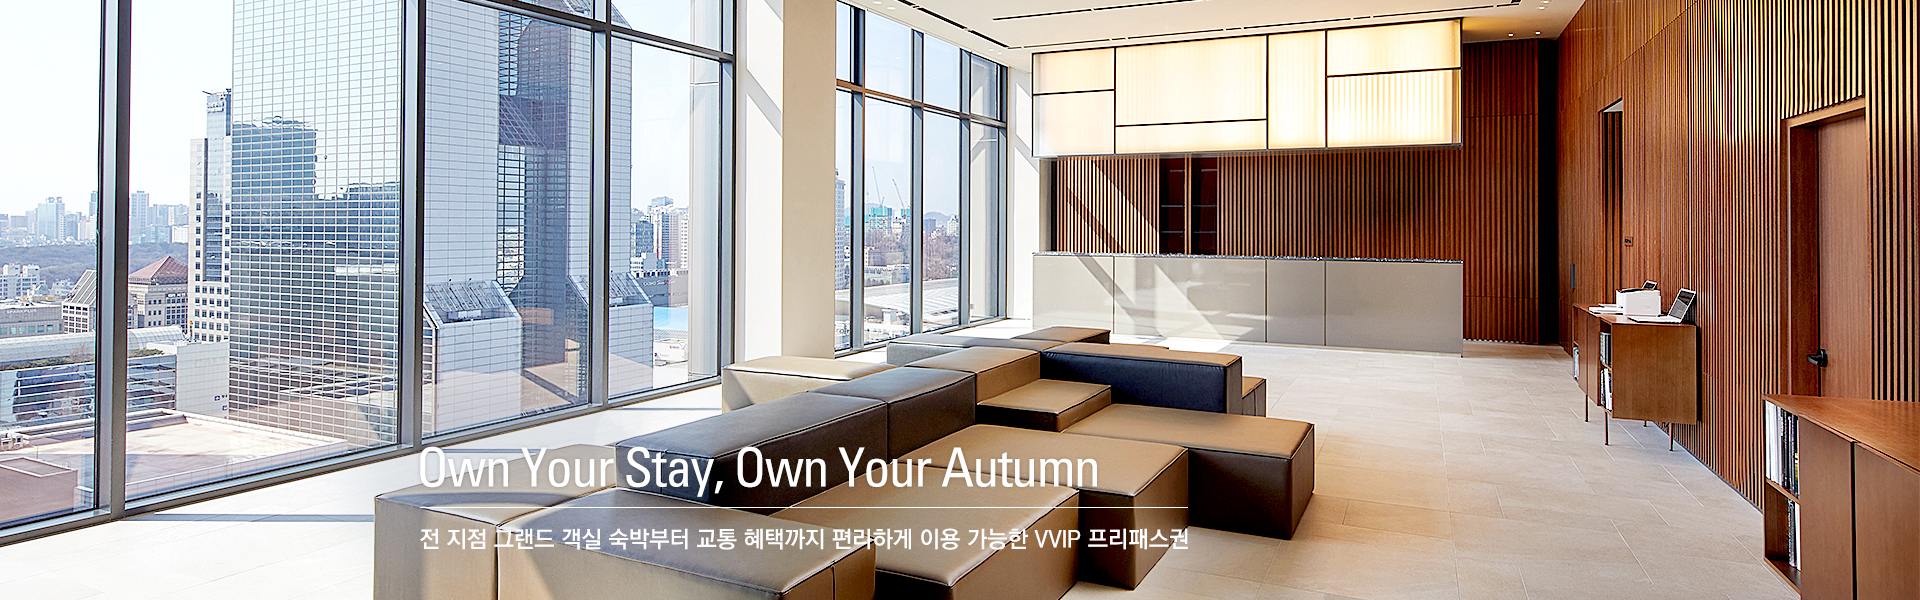 Own Your Stay, Own Your Autumn